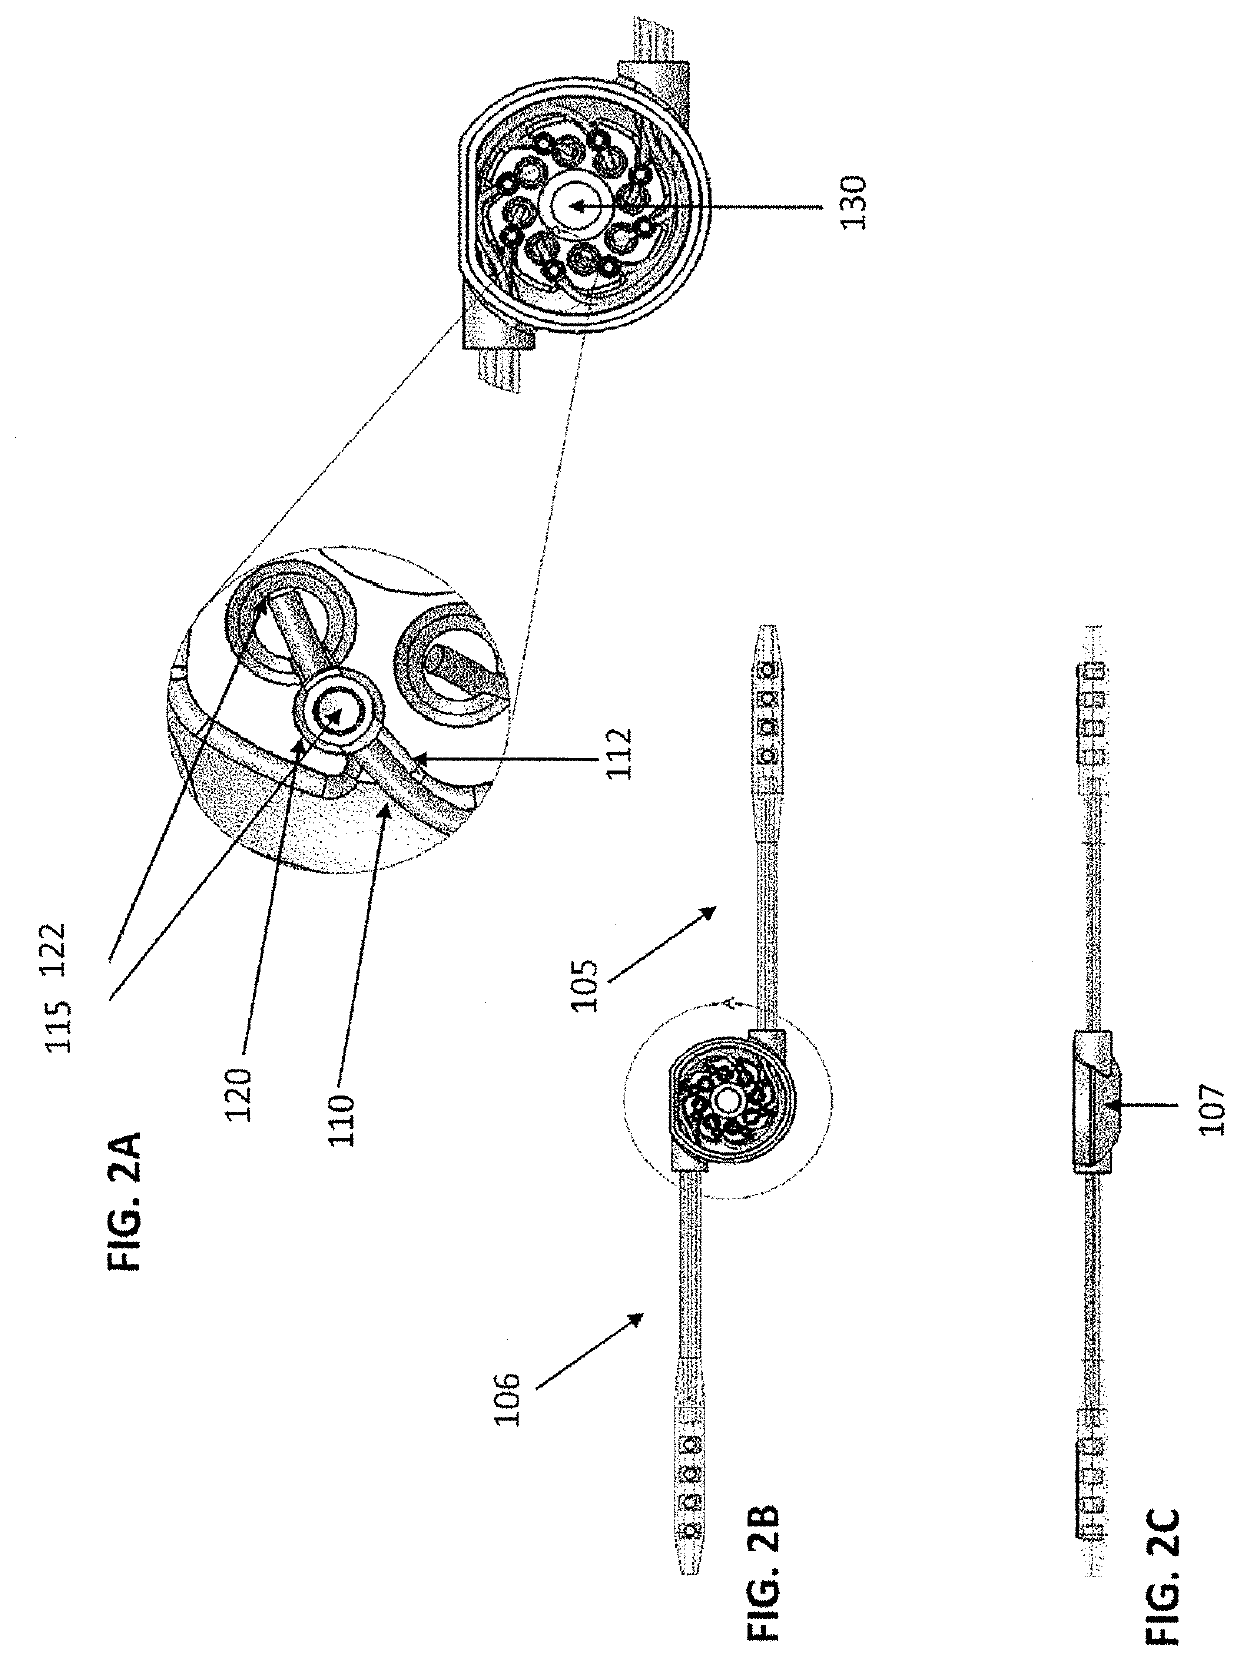 Method and System of Dorsal Root Ganglion Stimulation